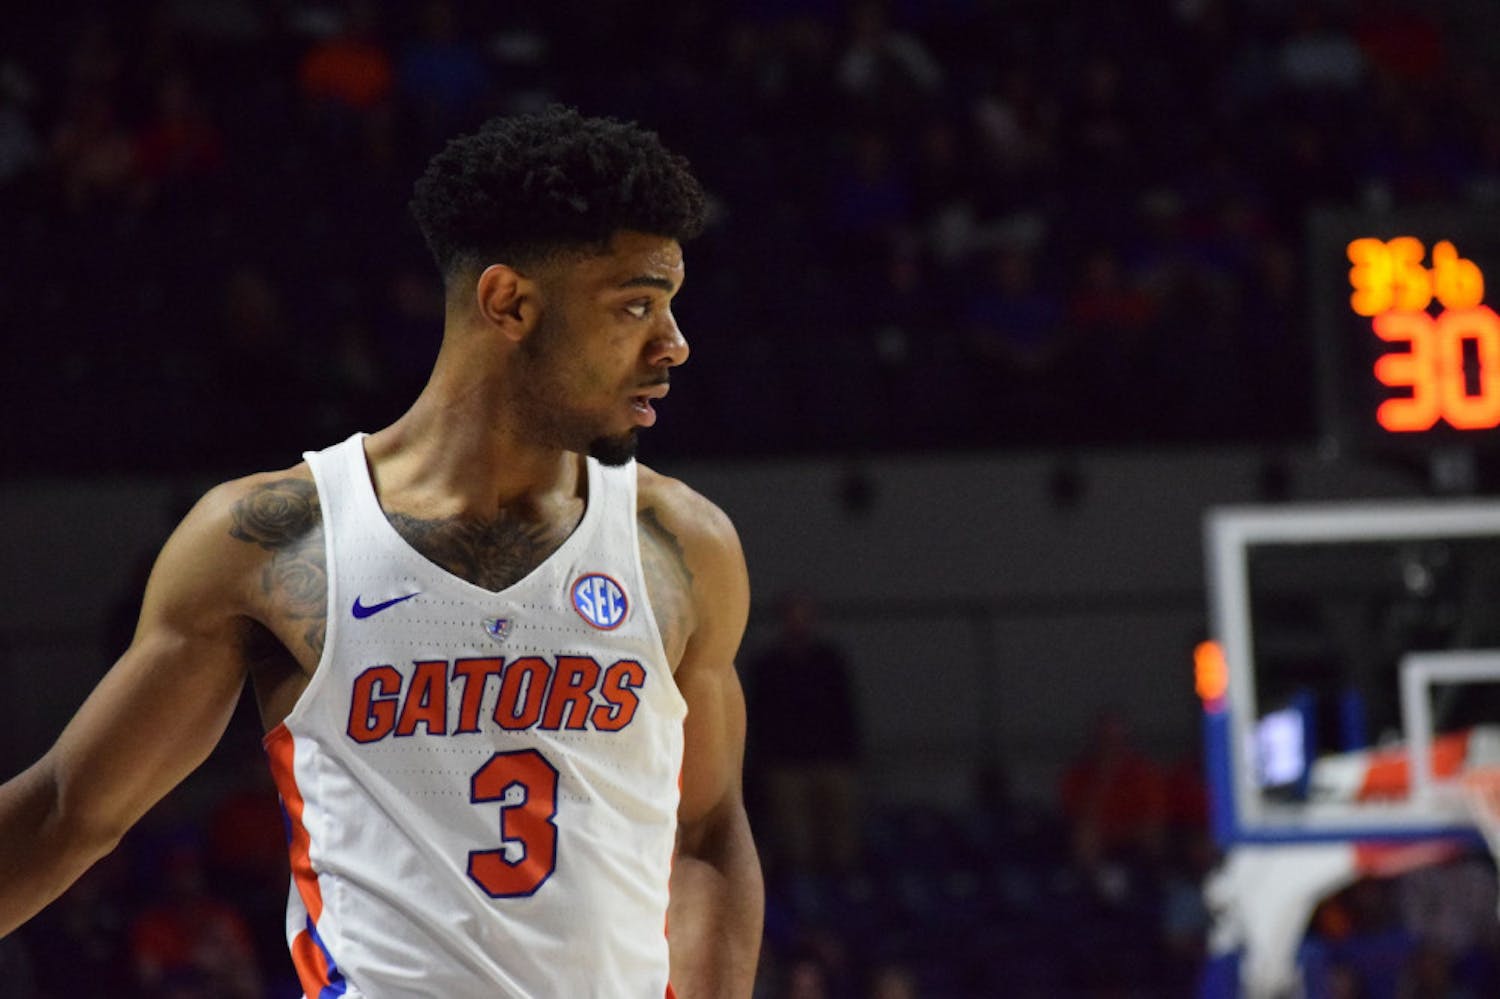 Jalen Hudson scored 22 points on 7-of-18 shooting in the Gators' 71-69 loss to Clemson on Saturday in Sunrise, Florida.